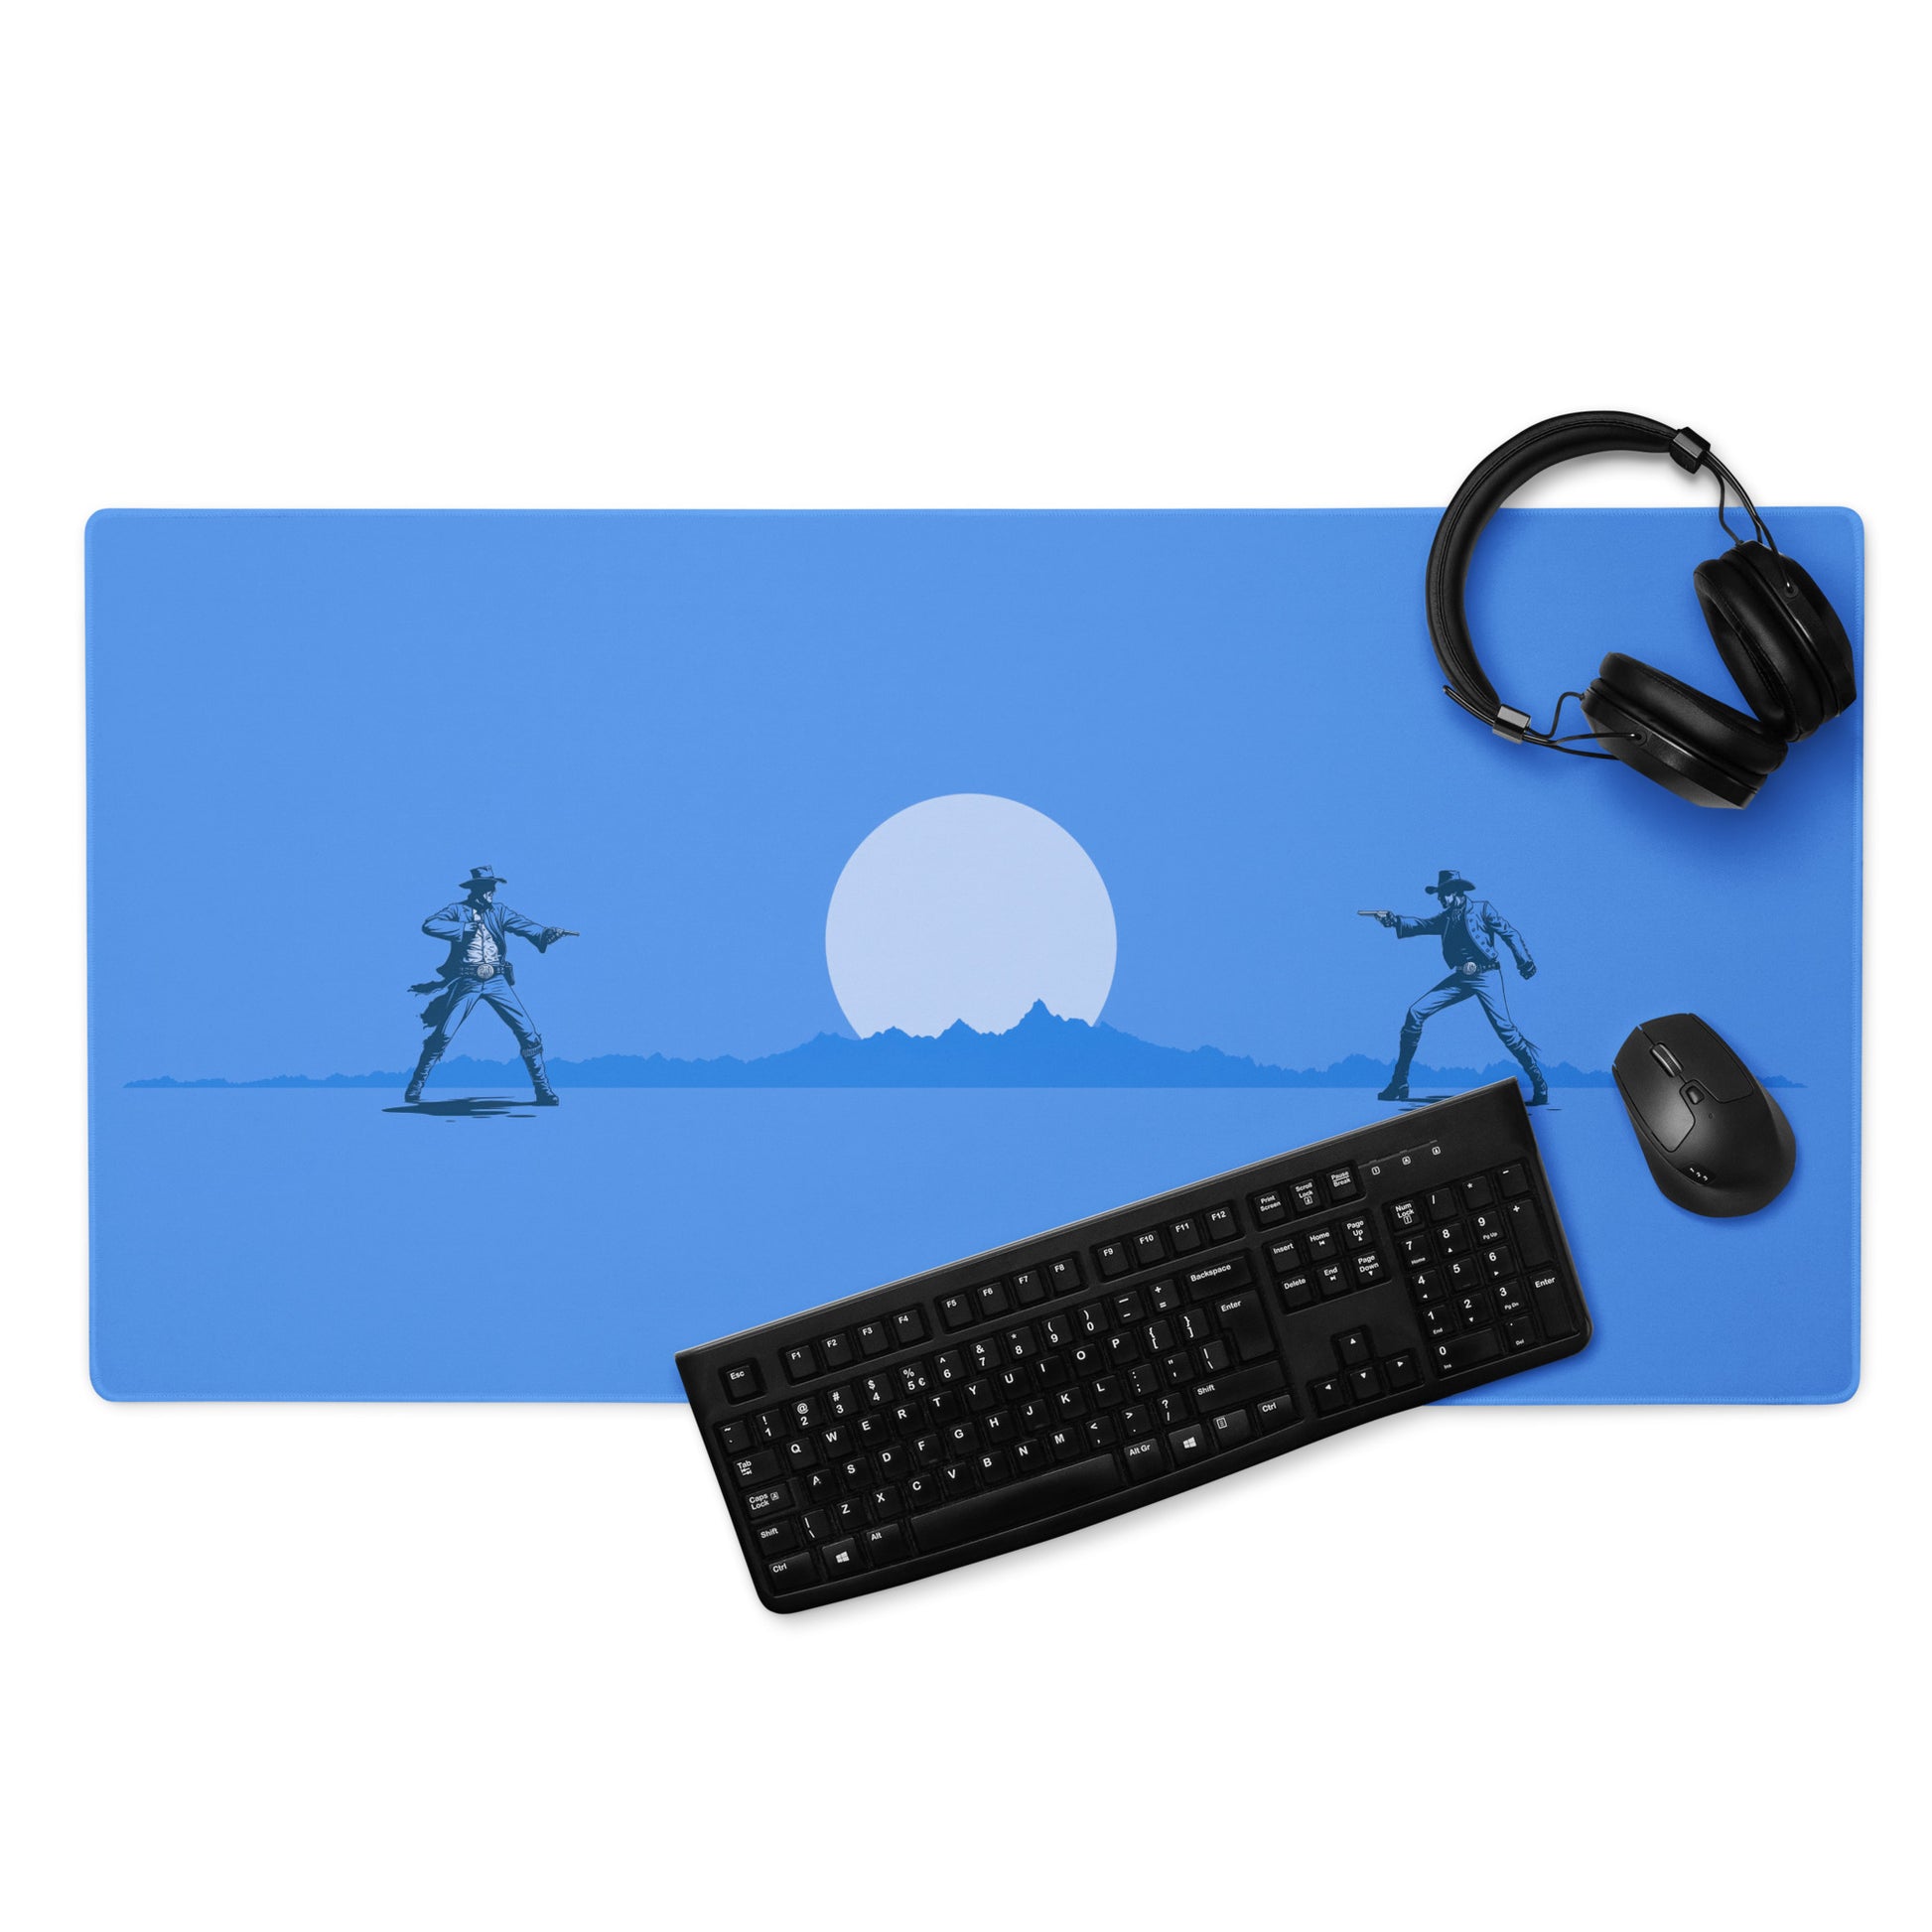 A blue 36" x 18" desk pad with two cowboys dueling. With a keyboard, mouse, and headphones sitting on it.